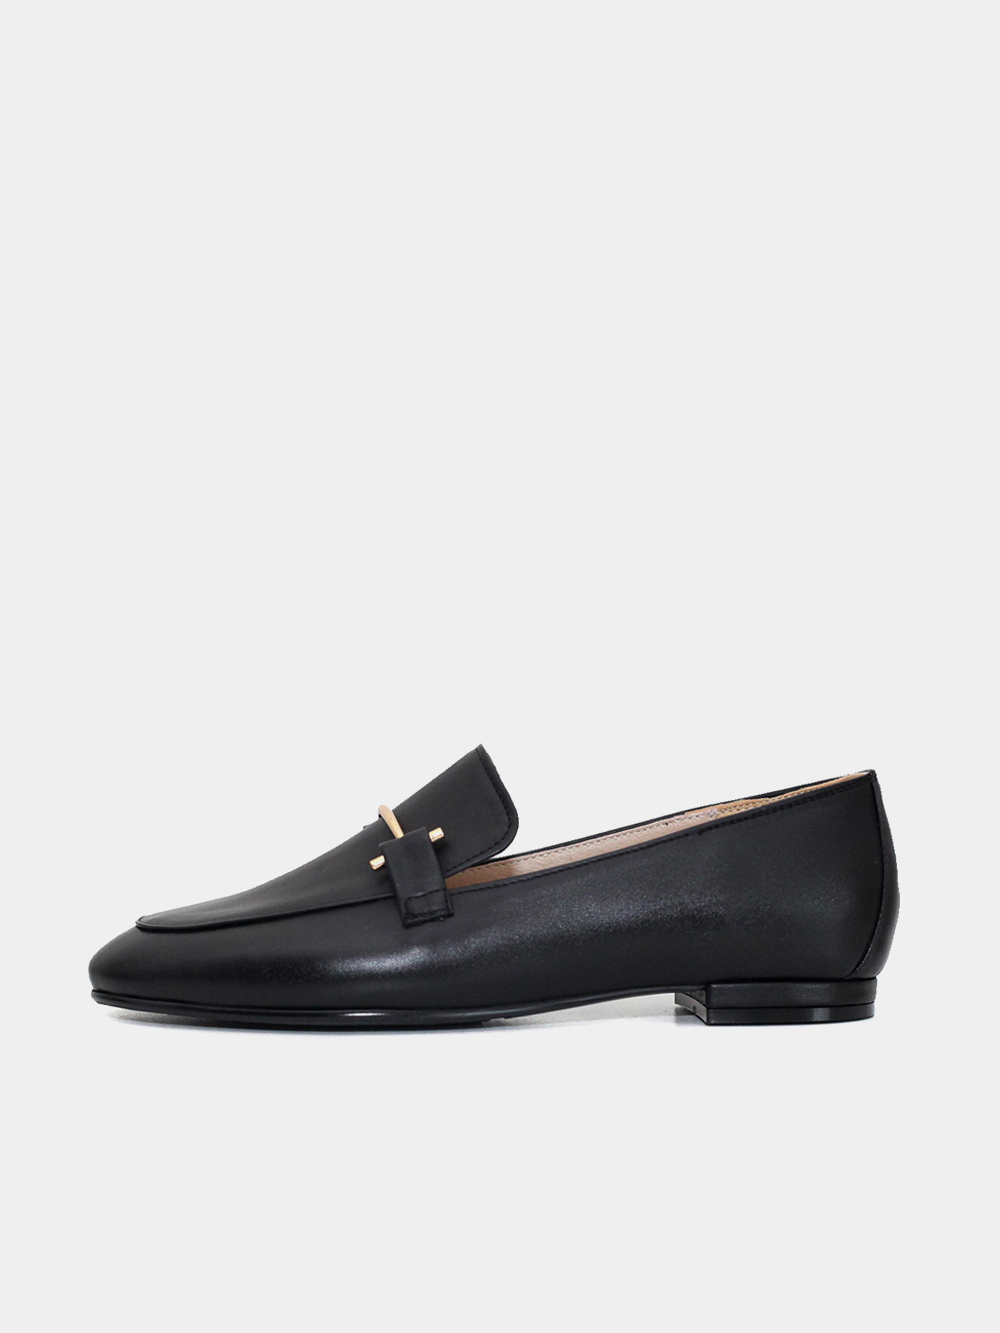 [Out of stock] Mrc052 Gold Pin Loafer (Black)